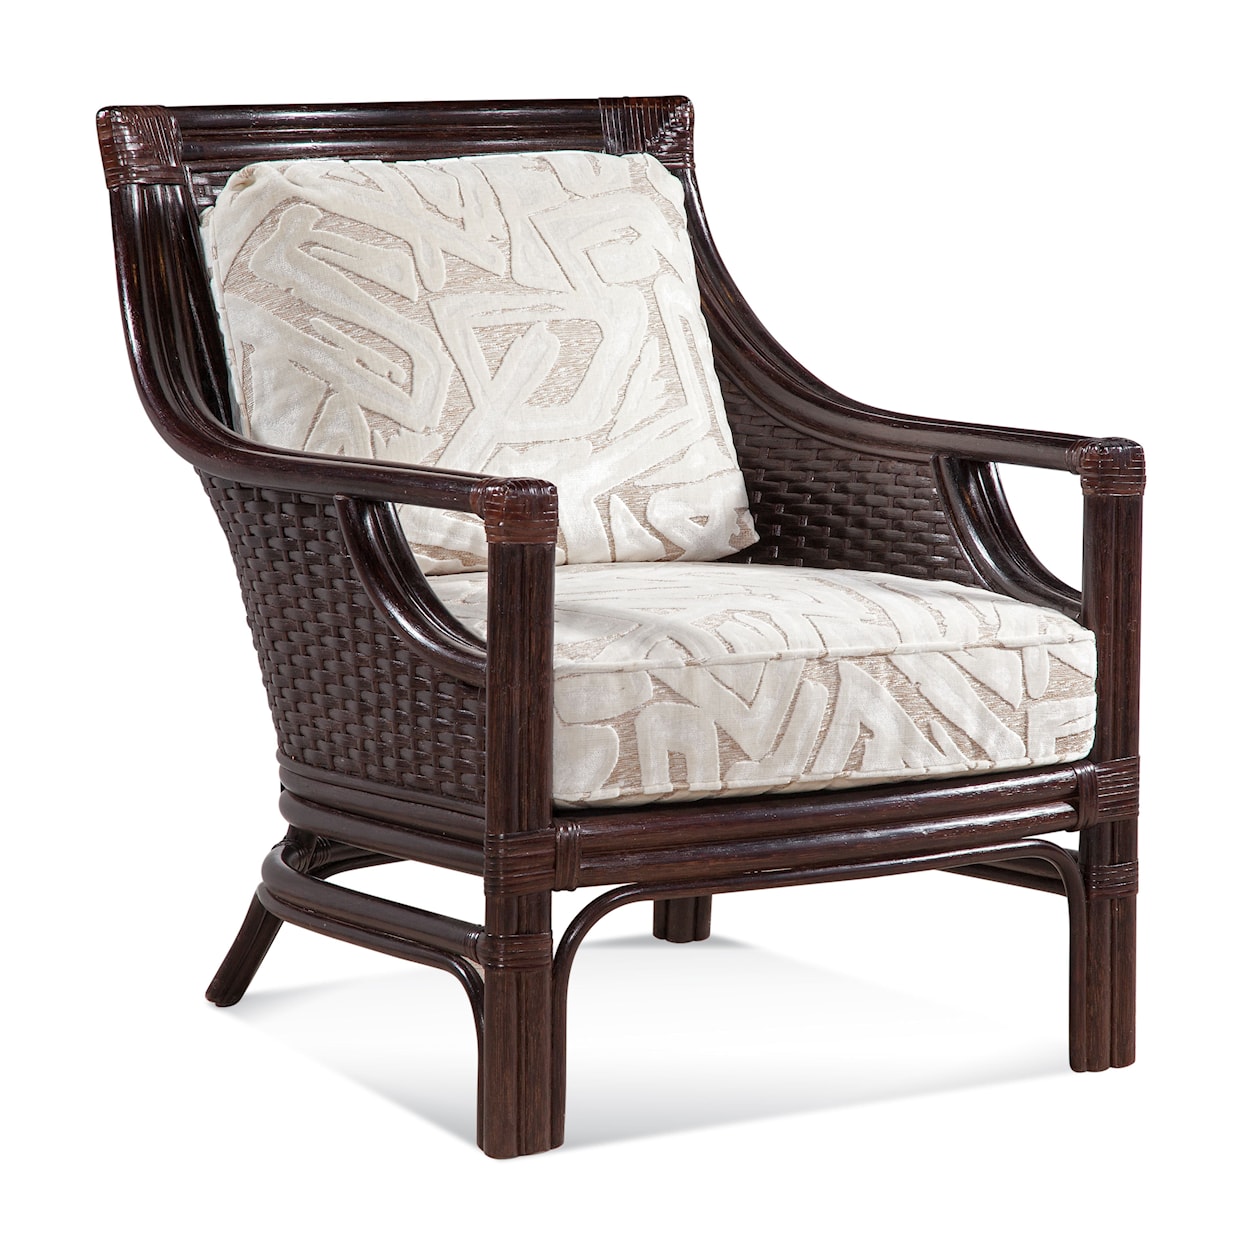 Braxton Culler Southport Chair